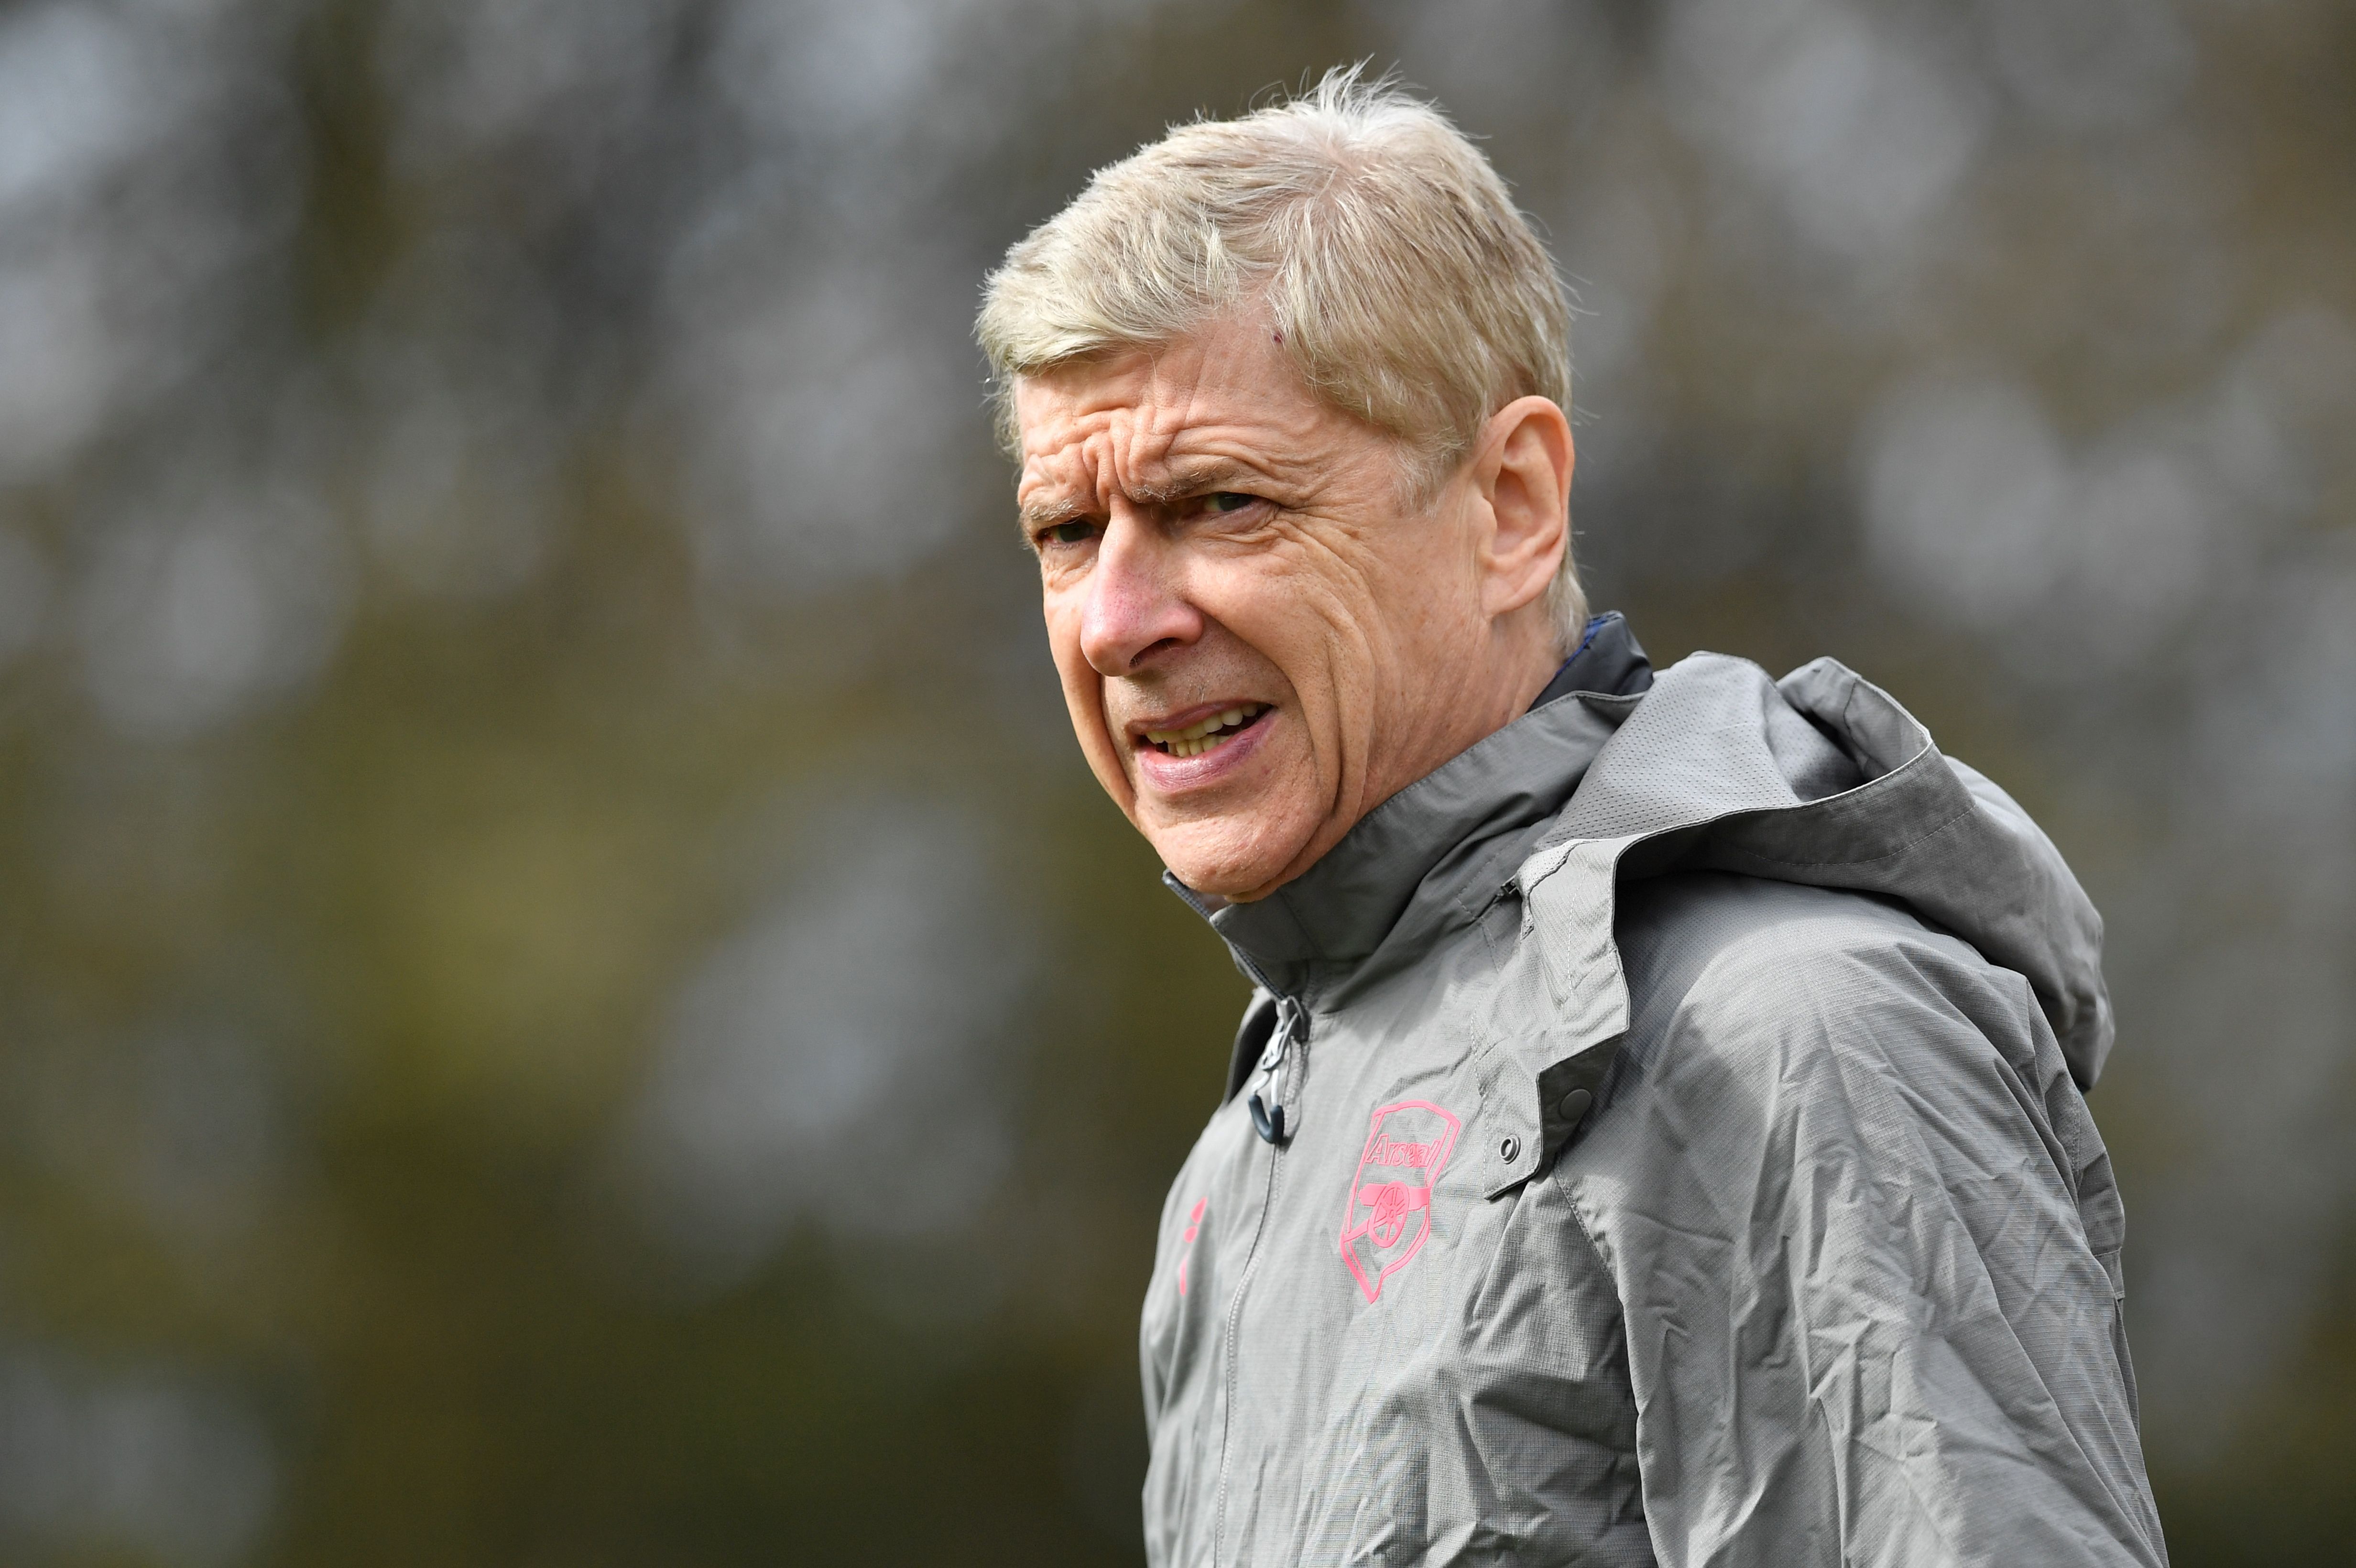 Arsenal's French manager Arsene Wenger attends a training session on the eve of their UEFA Europa League first leg quarter-final football match against CSKA Moscow at Arsenal's London Colney training ground on April 4, 2018.  / AFP PHOTO / Ben STANSALL / The erroneous mention[s] appearing in the metadata of this photo by Ben STANSALL has been modified in AFP systems in the following manner: [UEFA Europa League first leg quarter-final] instead of [UEFA Champions League first leg semi-final]. Please immediately remove the erroneous mention[s] from all your online services and delete it (them) from your servers. If you have been authorized by AFP to distribute it (them) to third parties, please ensure that the same actions are carried out by them. Failure to promptly comply with these instructions will entail liability on your part for any continued or post notification usage. Therefore we thank you very much for all your attention and prompt action. We are sorry for the inconvenience this notification may cause and remain at your disposal for any further information you may require.        (Photo credit should read BEN STANSALL/AFP/Getty Images)